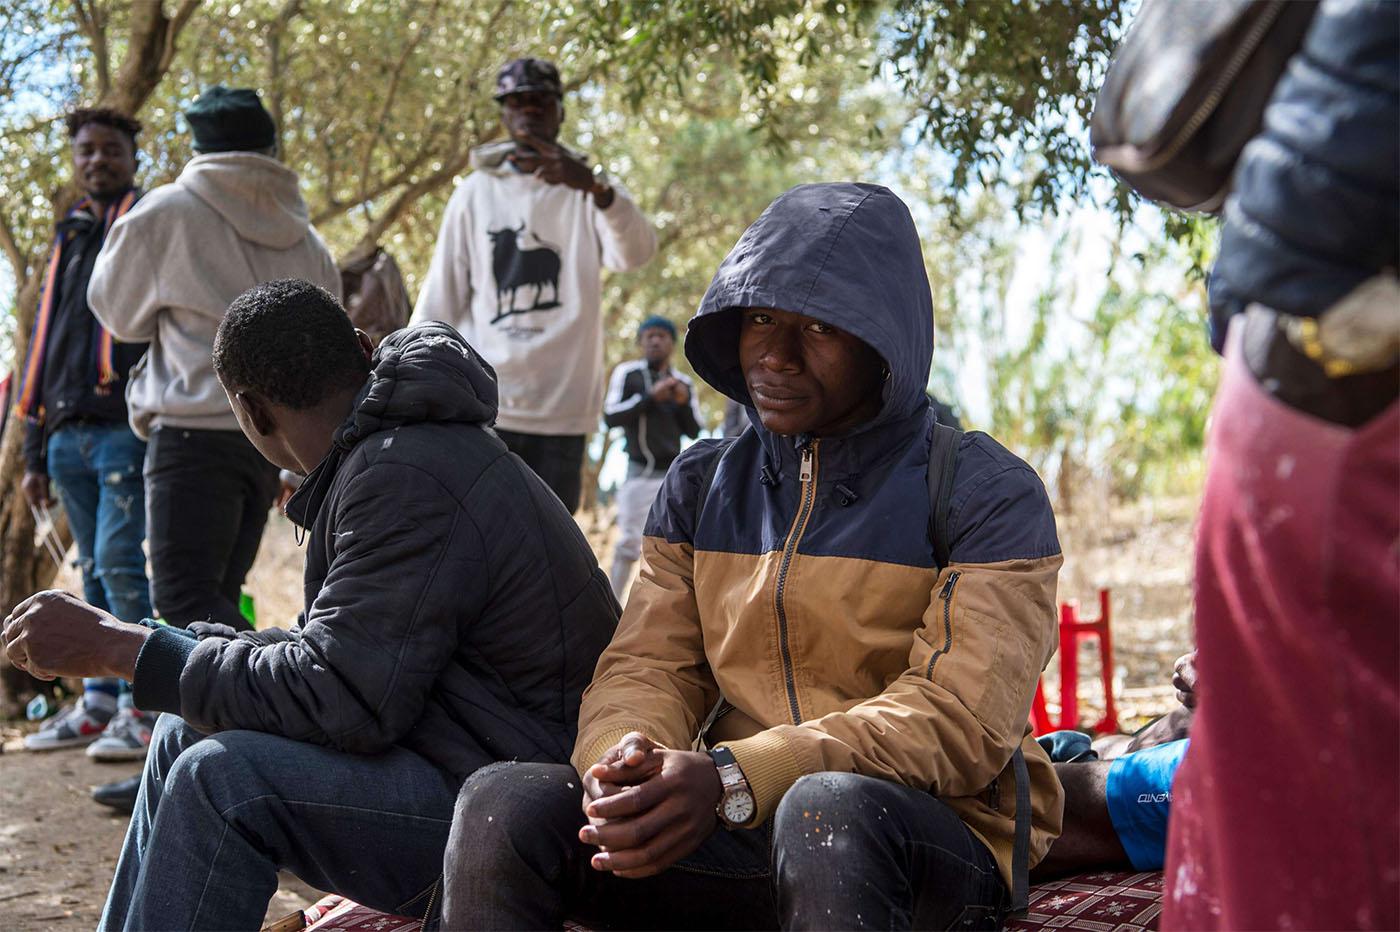 Migrants from Sub-Saharan Africa take shelter while hiding from the police in a forest in the district of Boukhalef of Tangiers